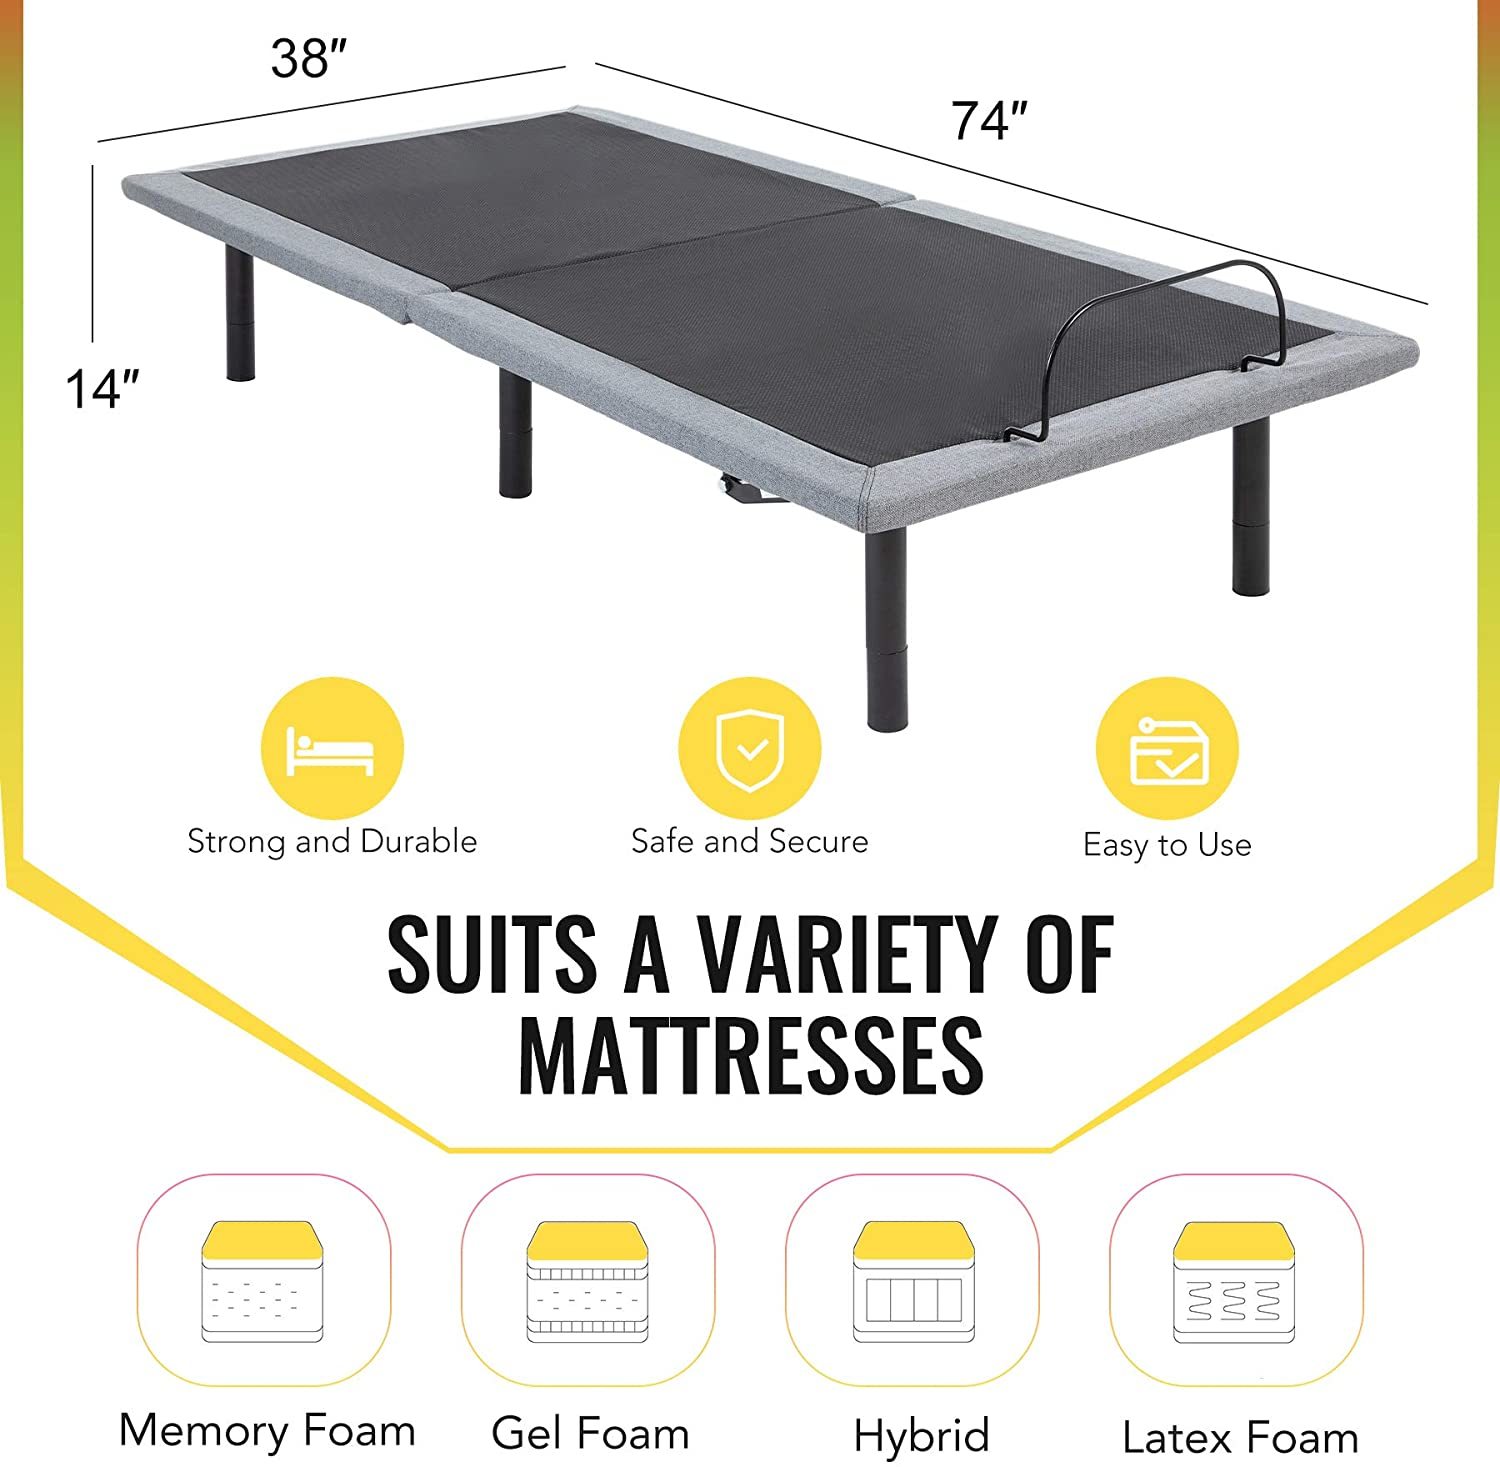 CO-Z Adjustable Bed Review - Mattress Compatibility